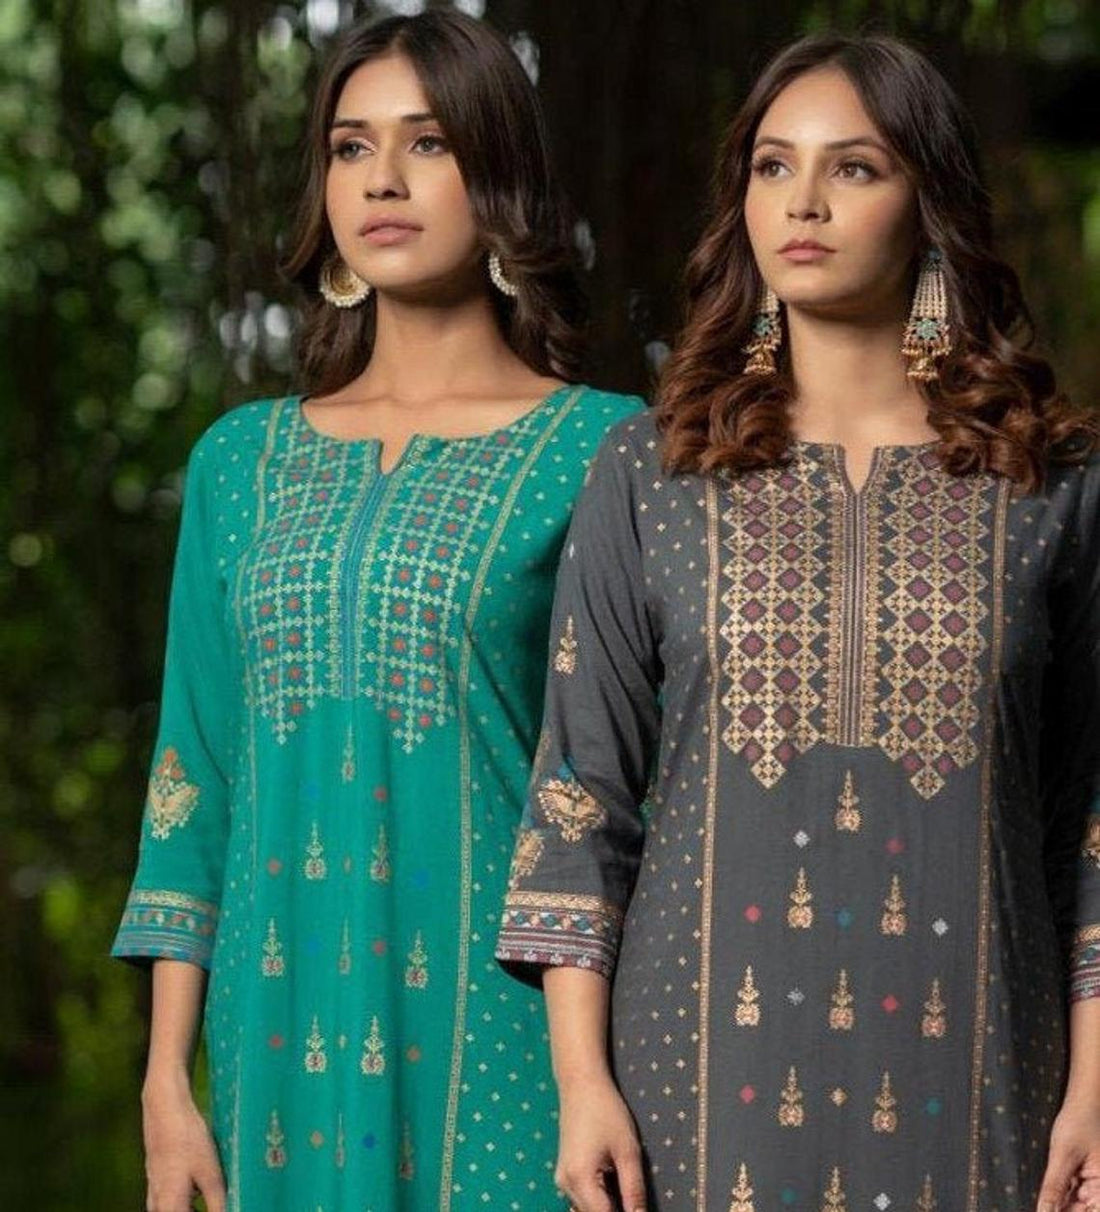 Aangan of India - new dresses for your new look!